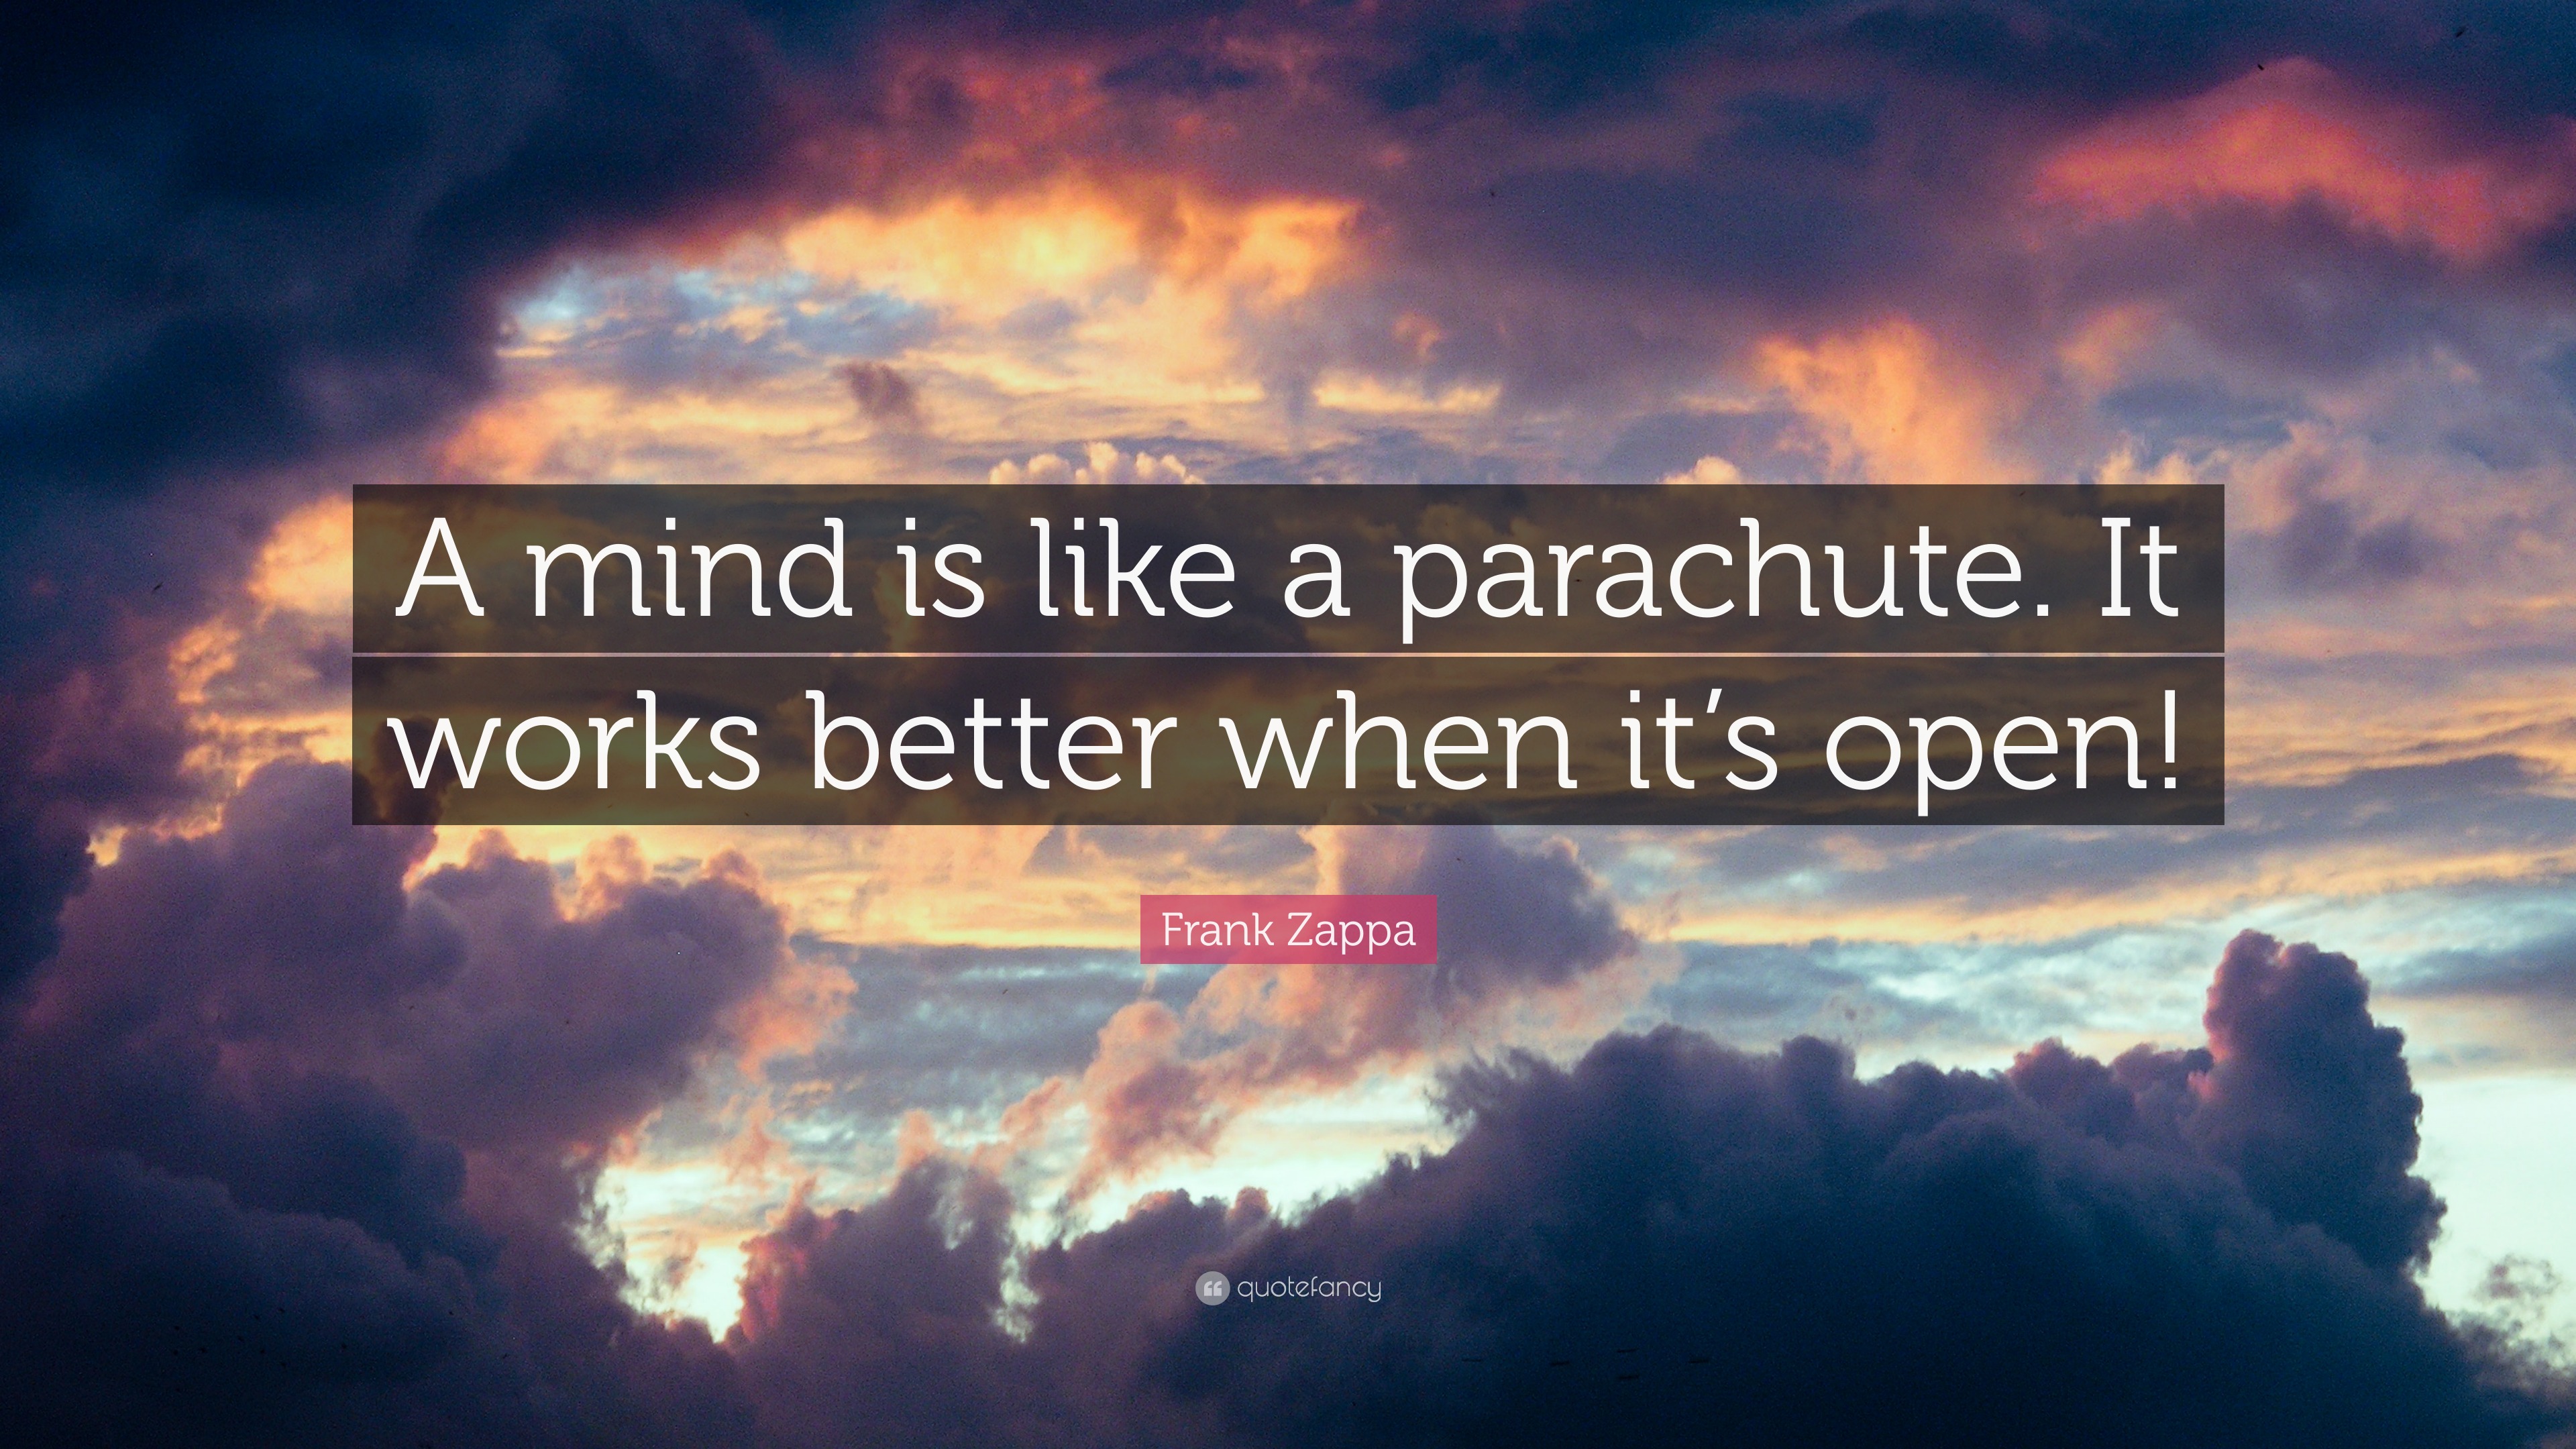 Frank Zappa Quote: “A mind is like a parachute. It works better when it ...